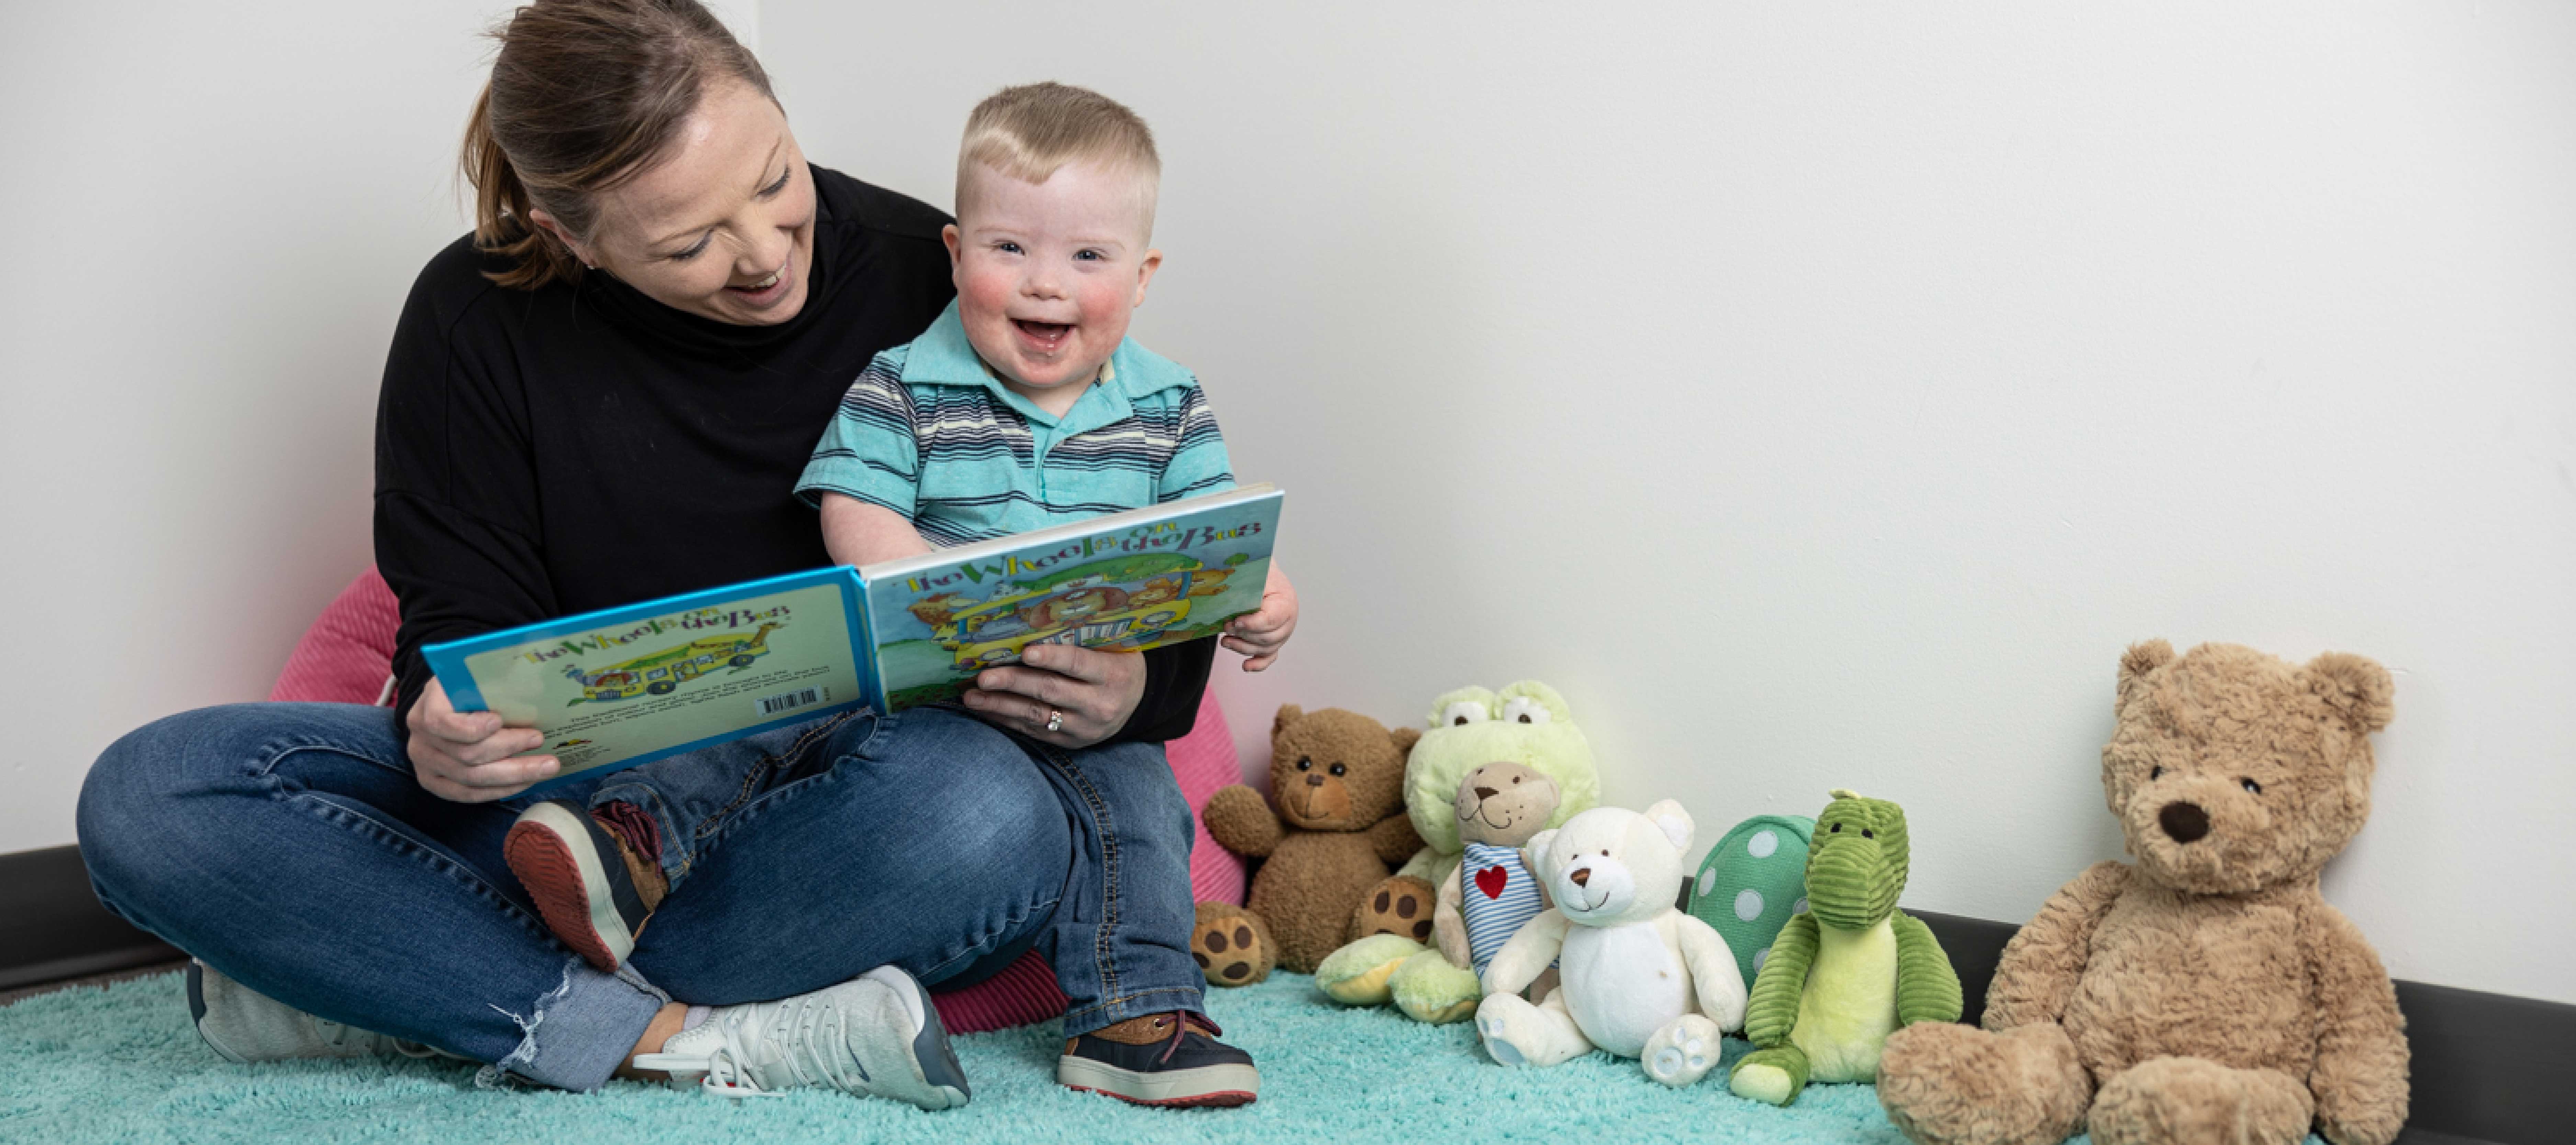 Toddler with Down syndrome on Mom’s lap, smiling while she reads